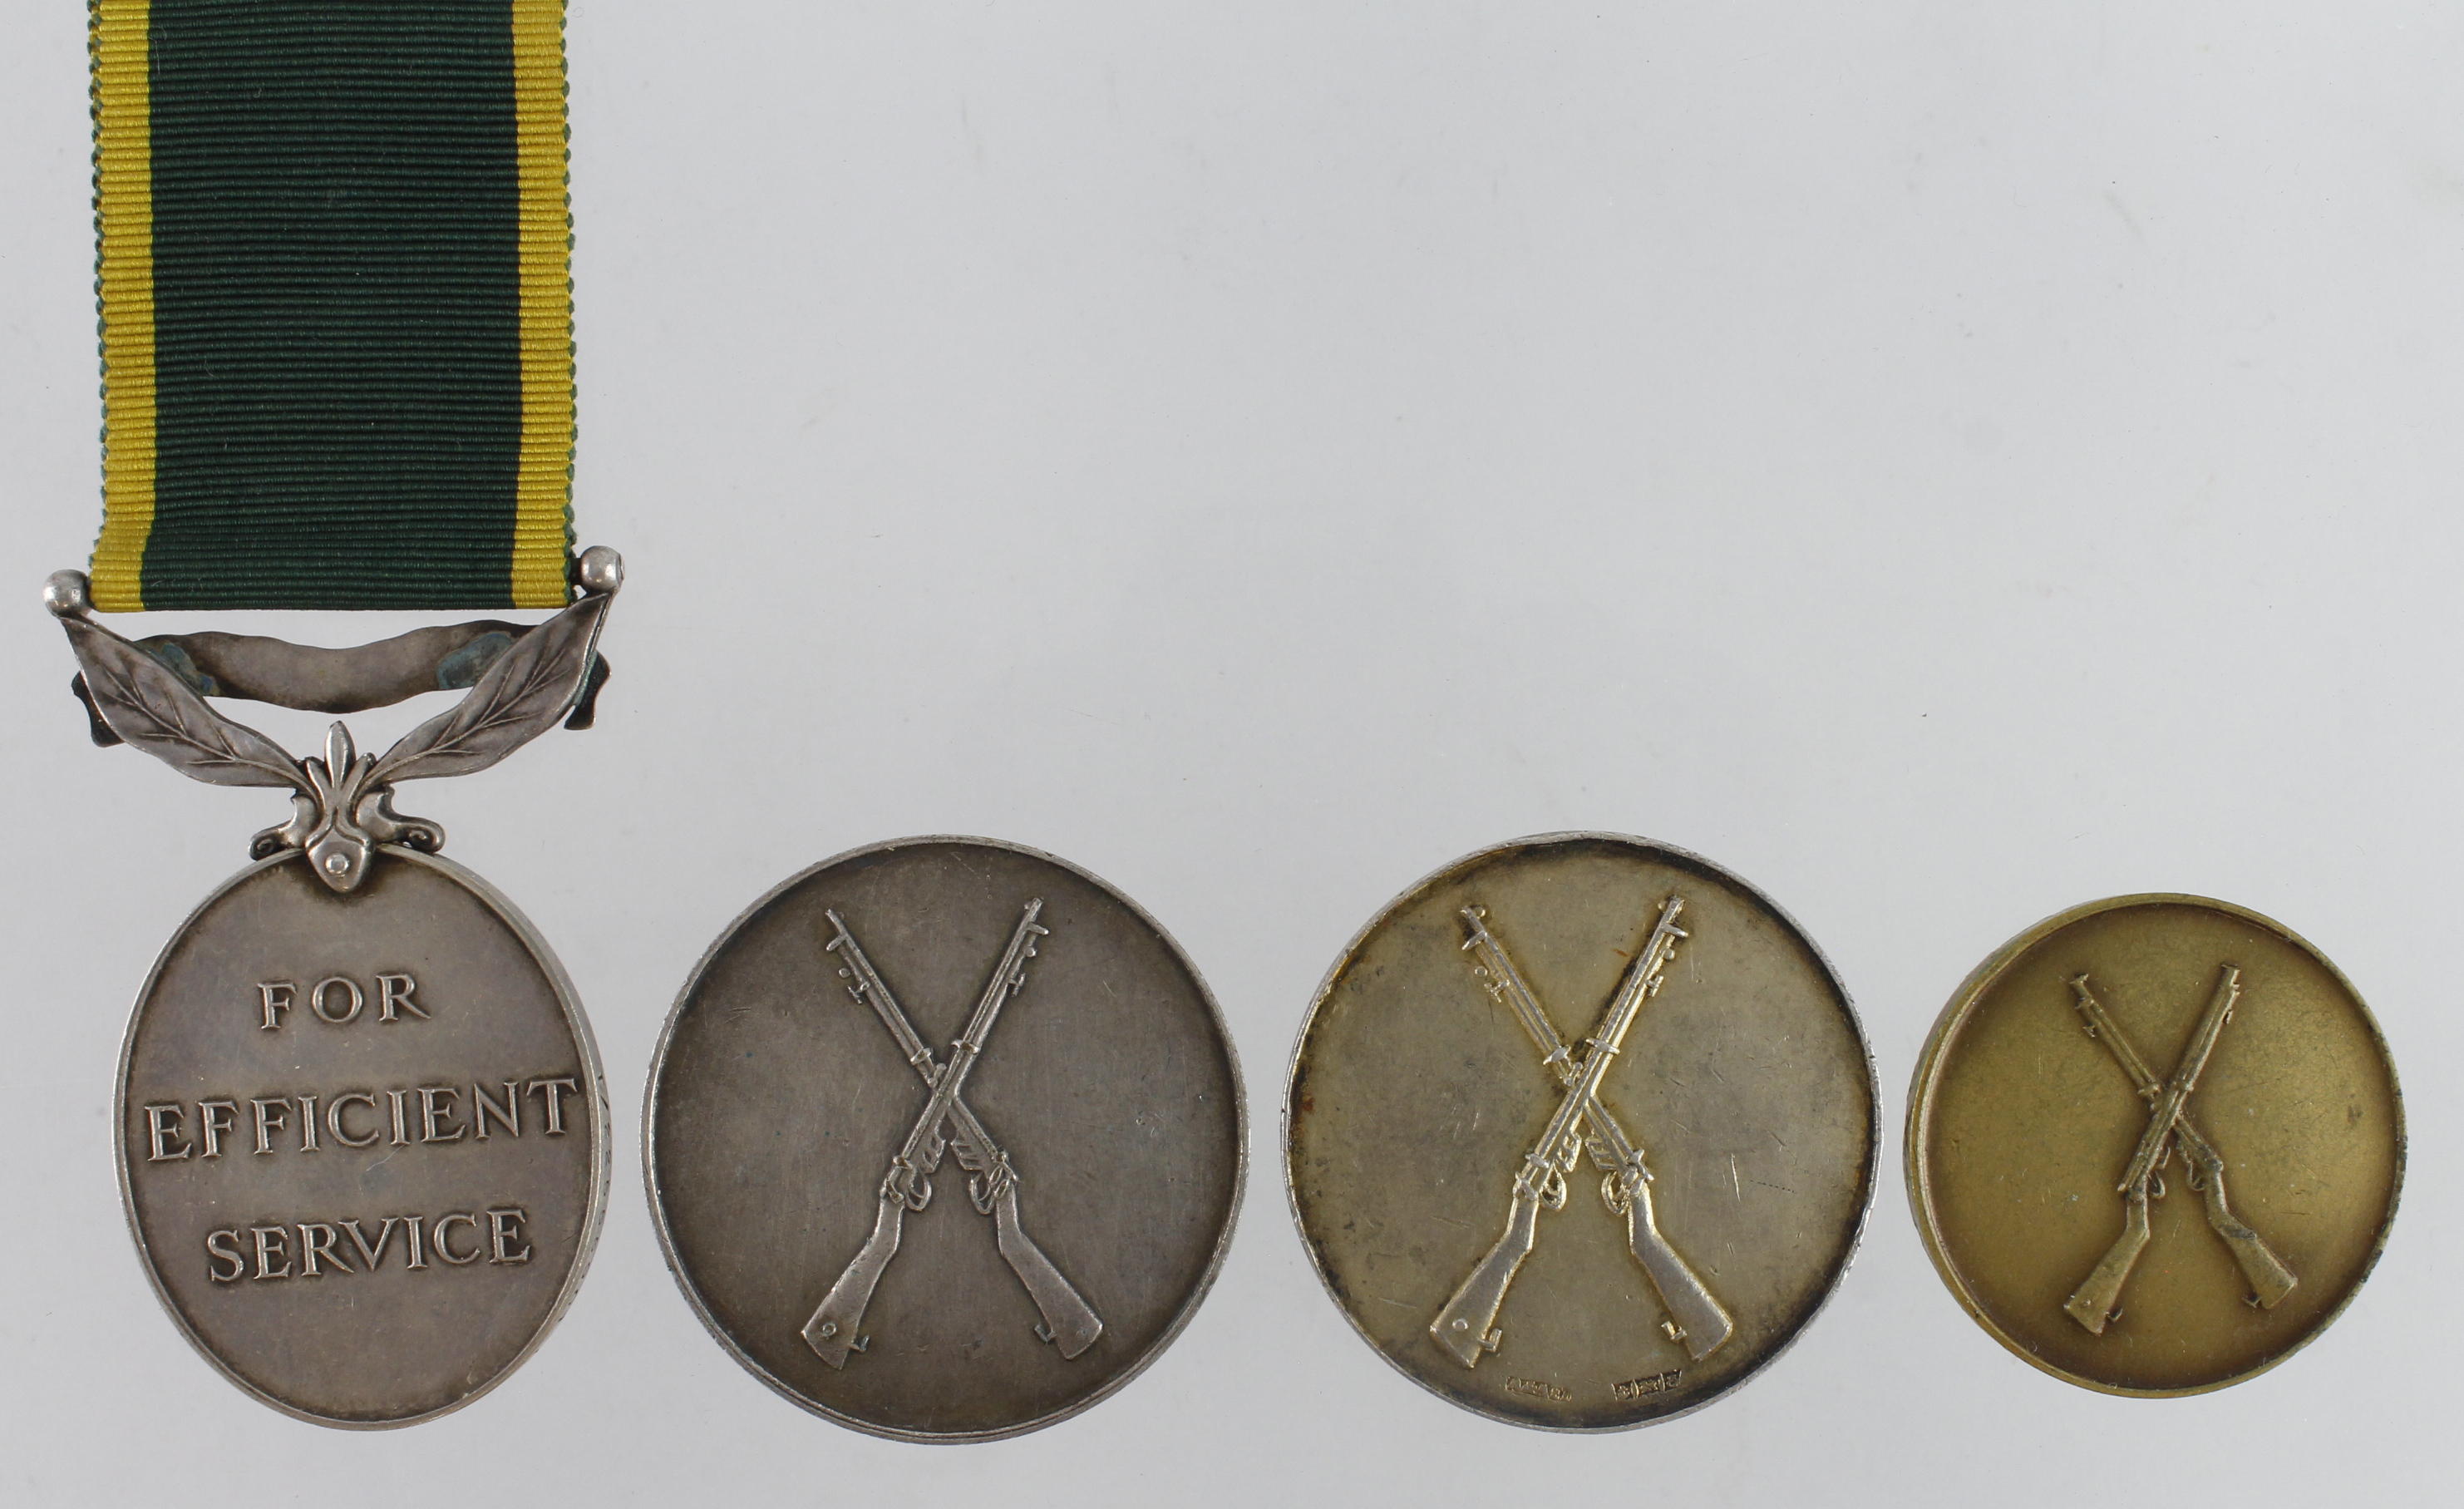 Efficiency Medal QE2 with Territorial clasp (T/22555901 Cpl A K Gallon RASC) with three shooting - Image 2 of 2